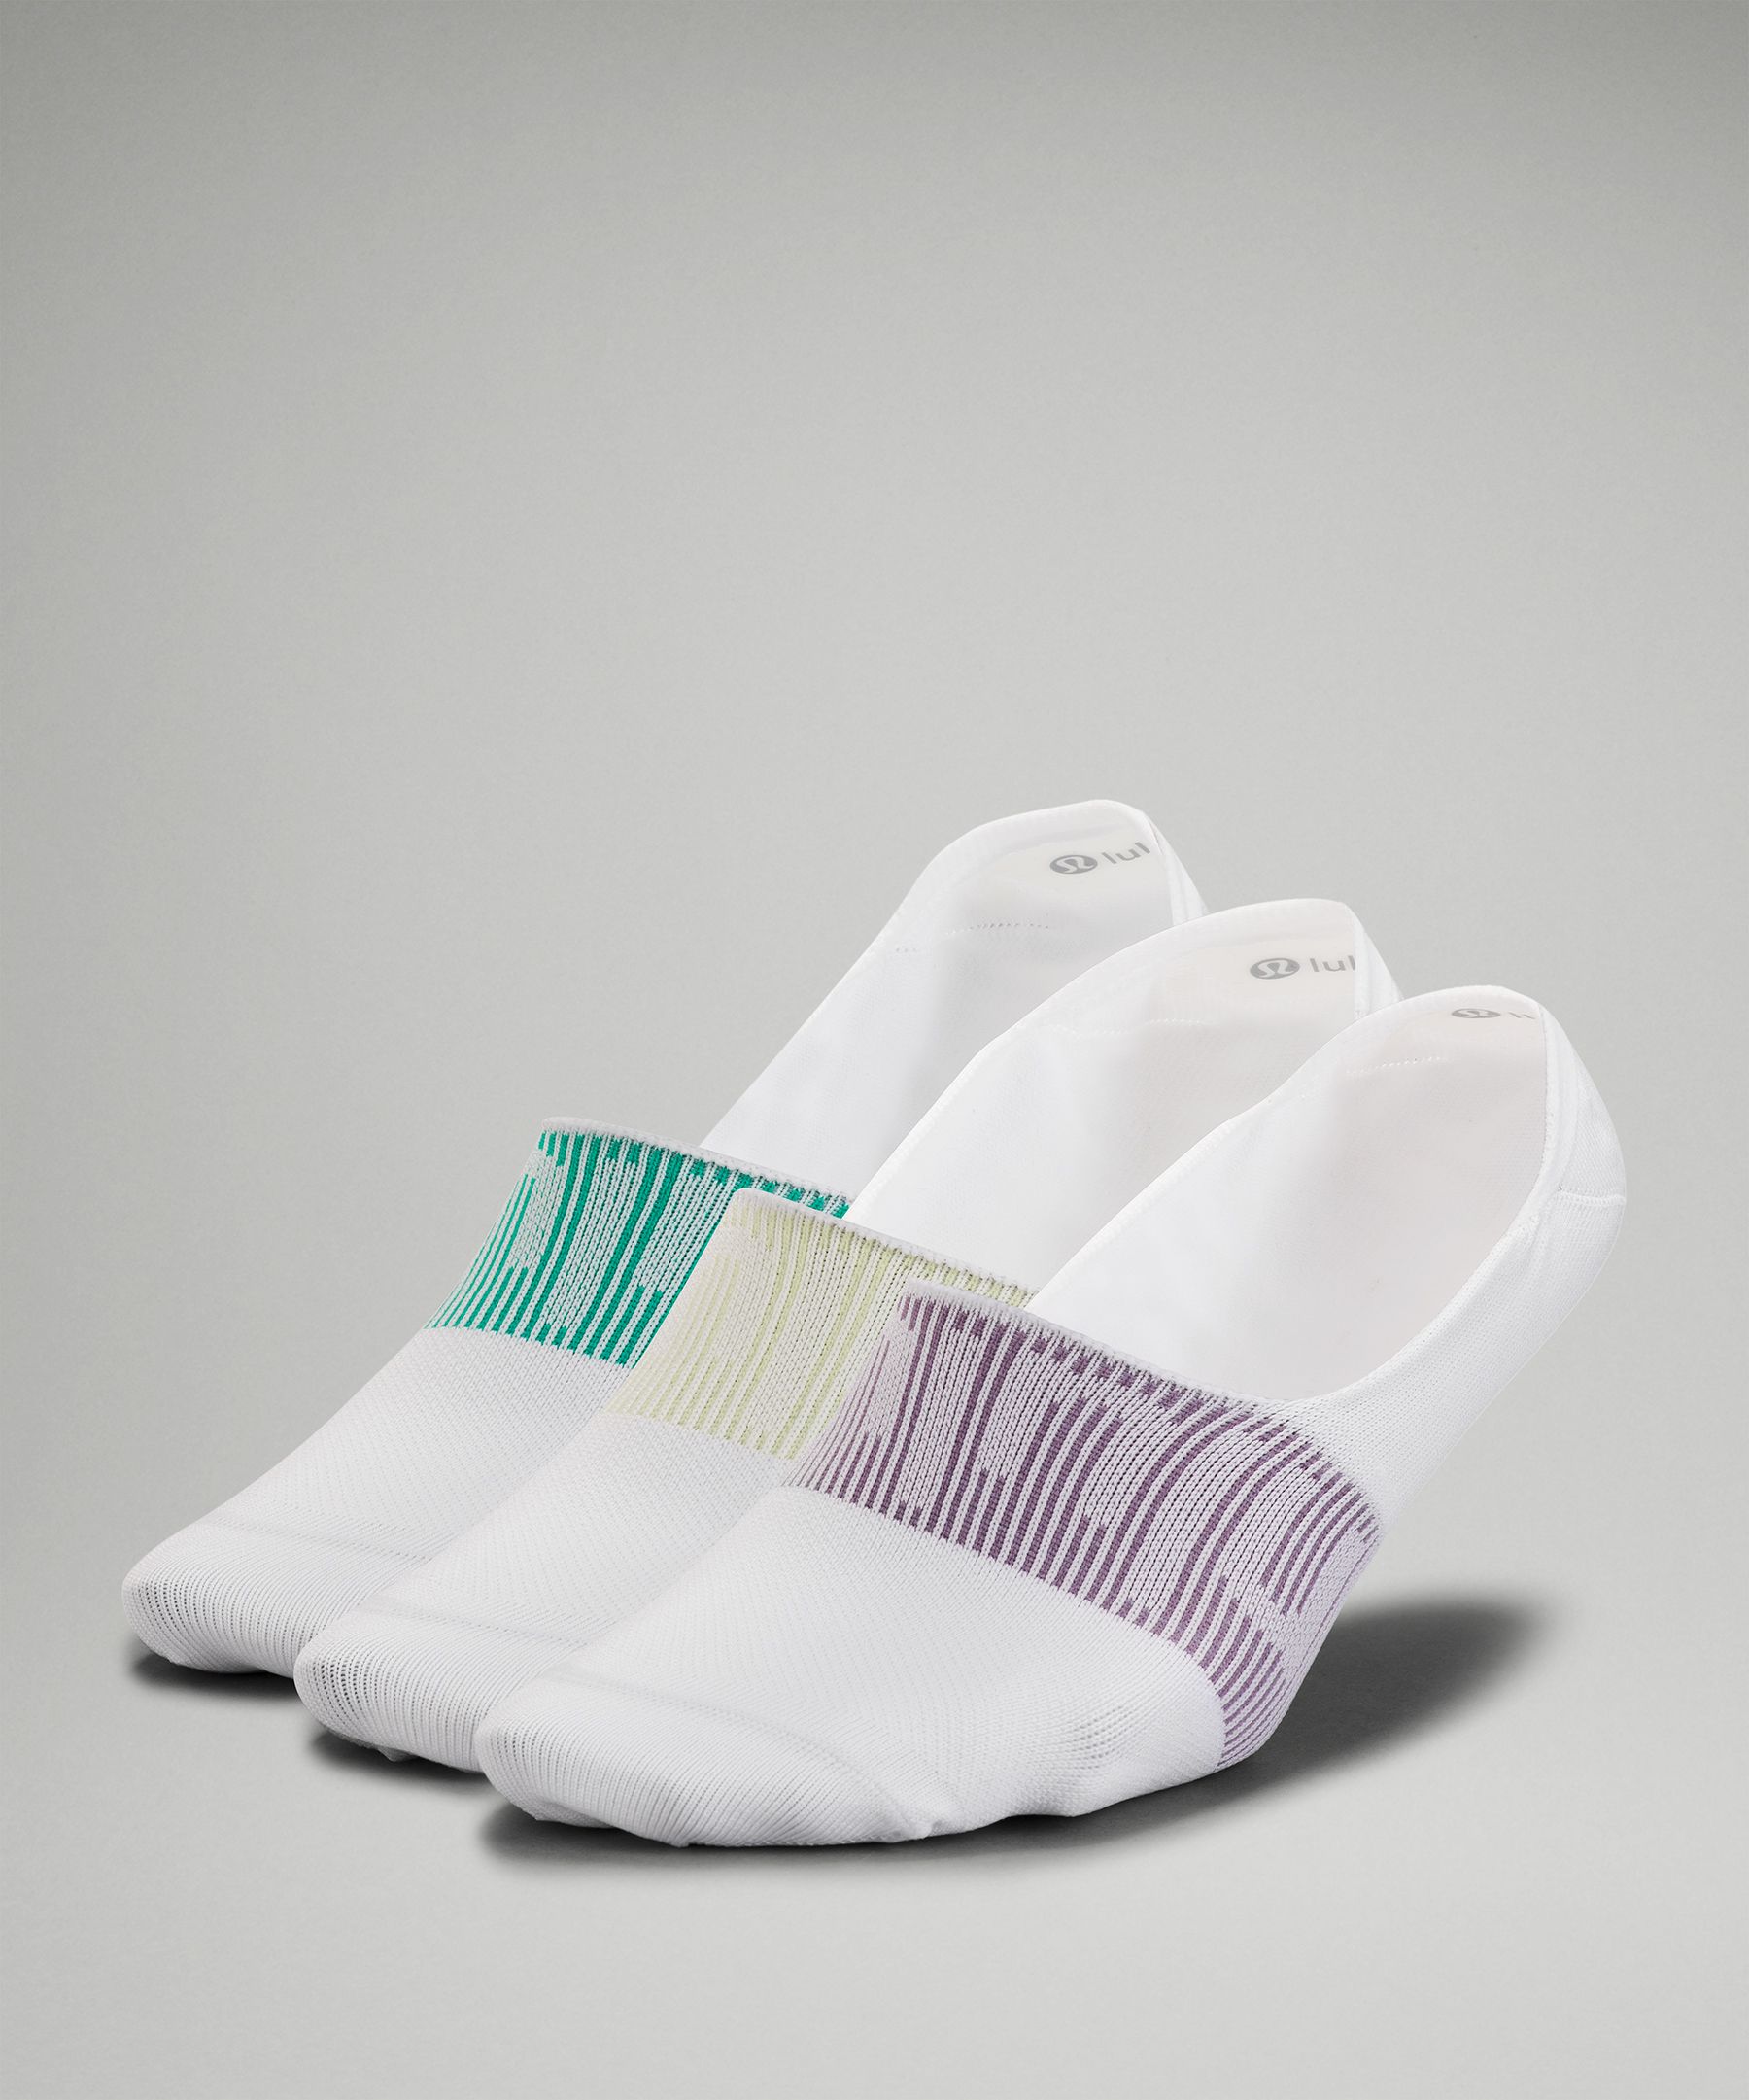 Lululemon Daily Stride No-show Socks 3 Pack In White/crispin Green/maldives Green